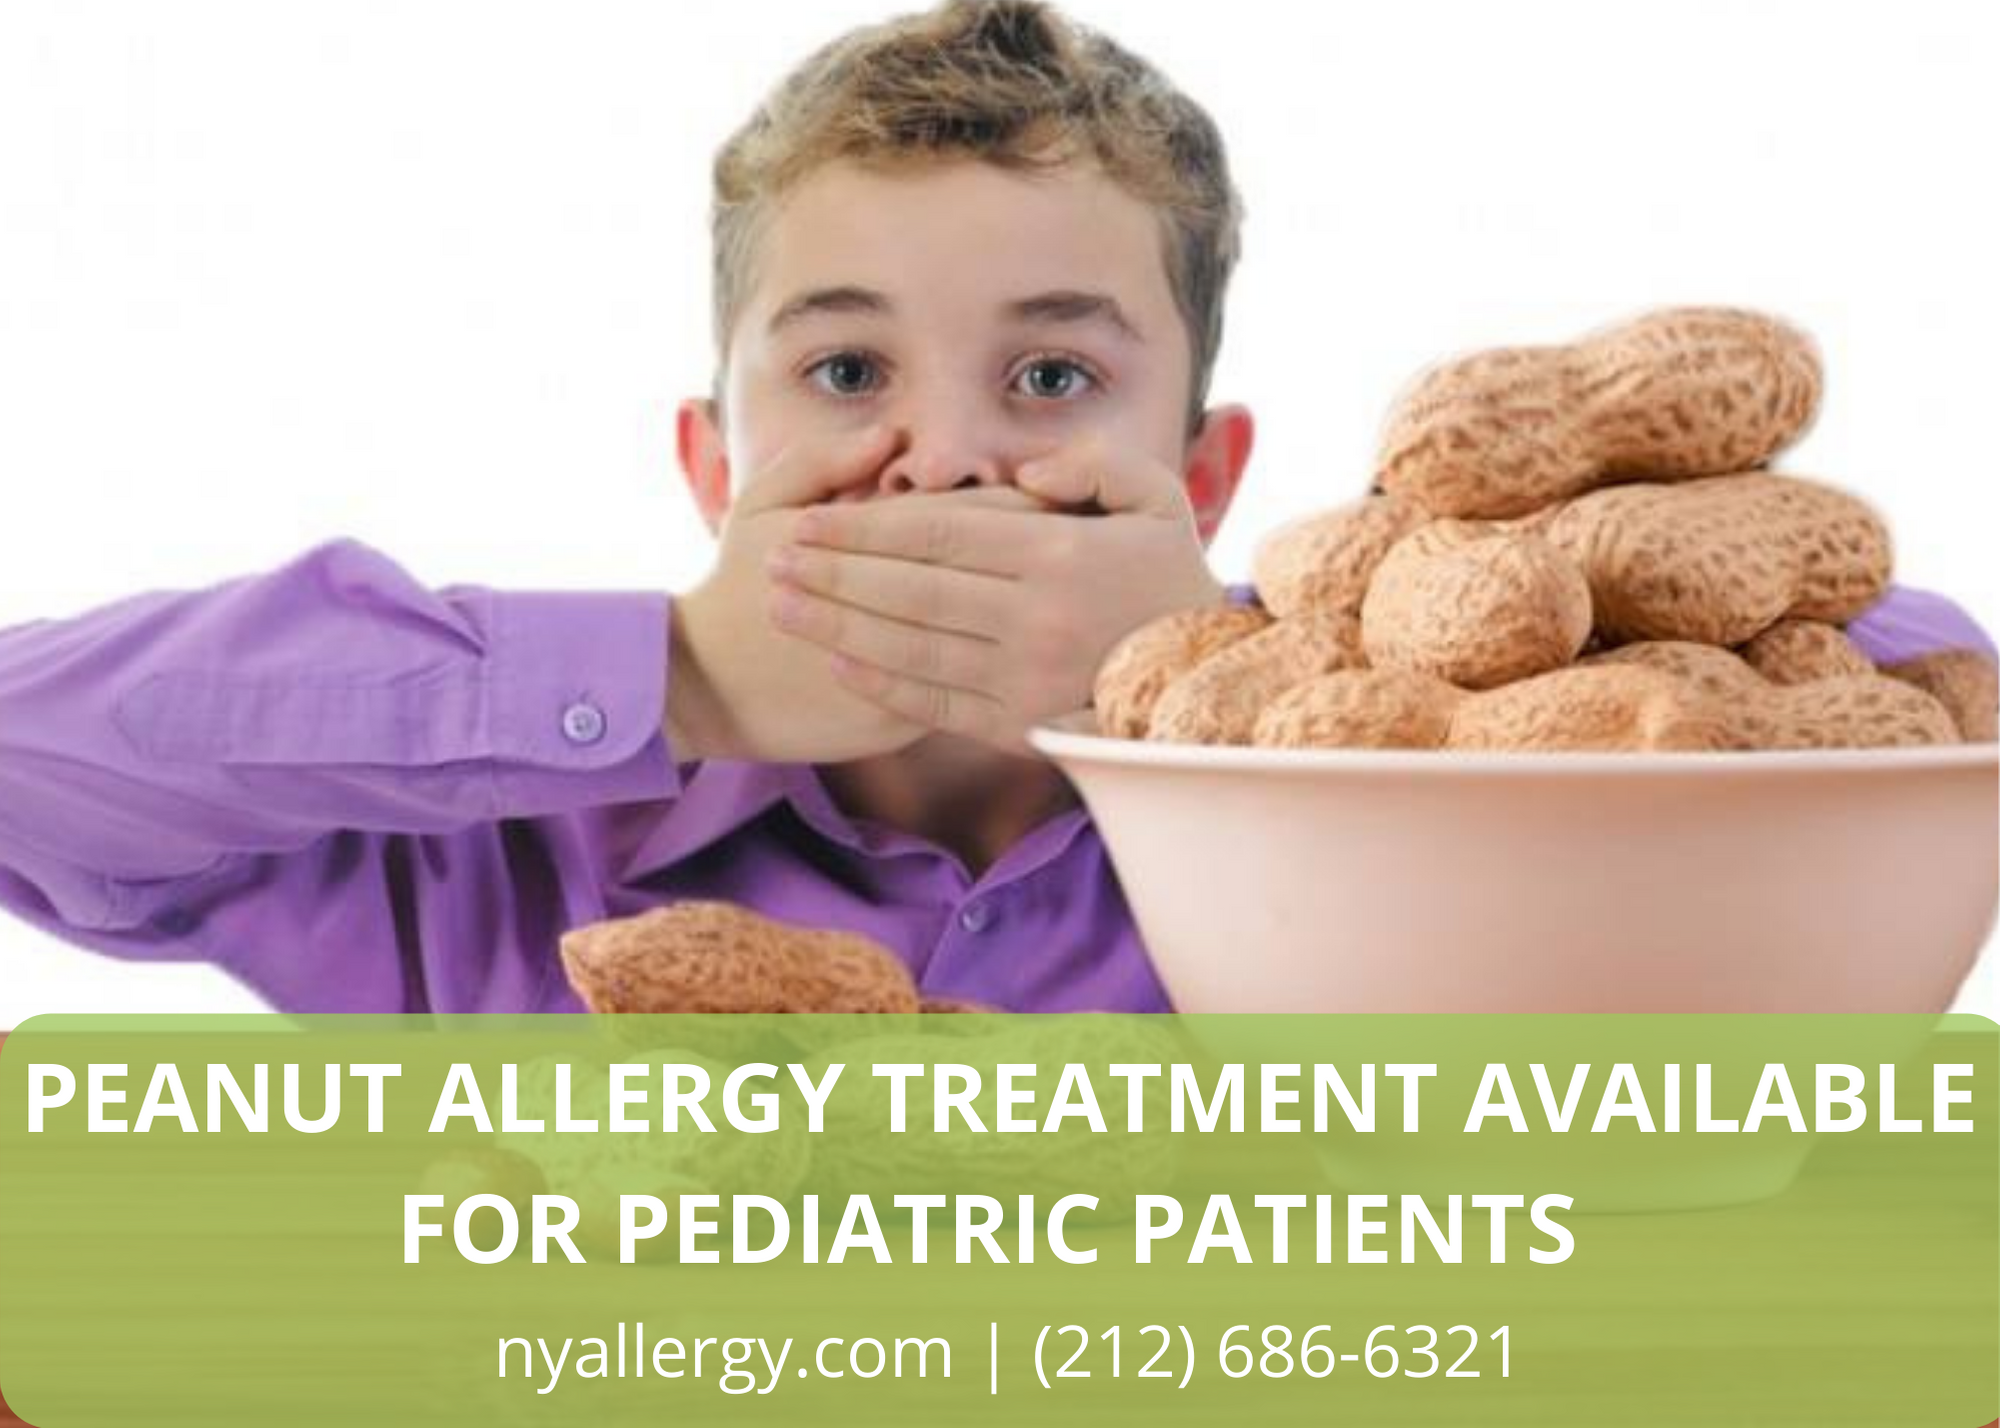 What You Need to Know About the FDA Peanut Allergy Treatment Feature Image